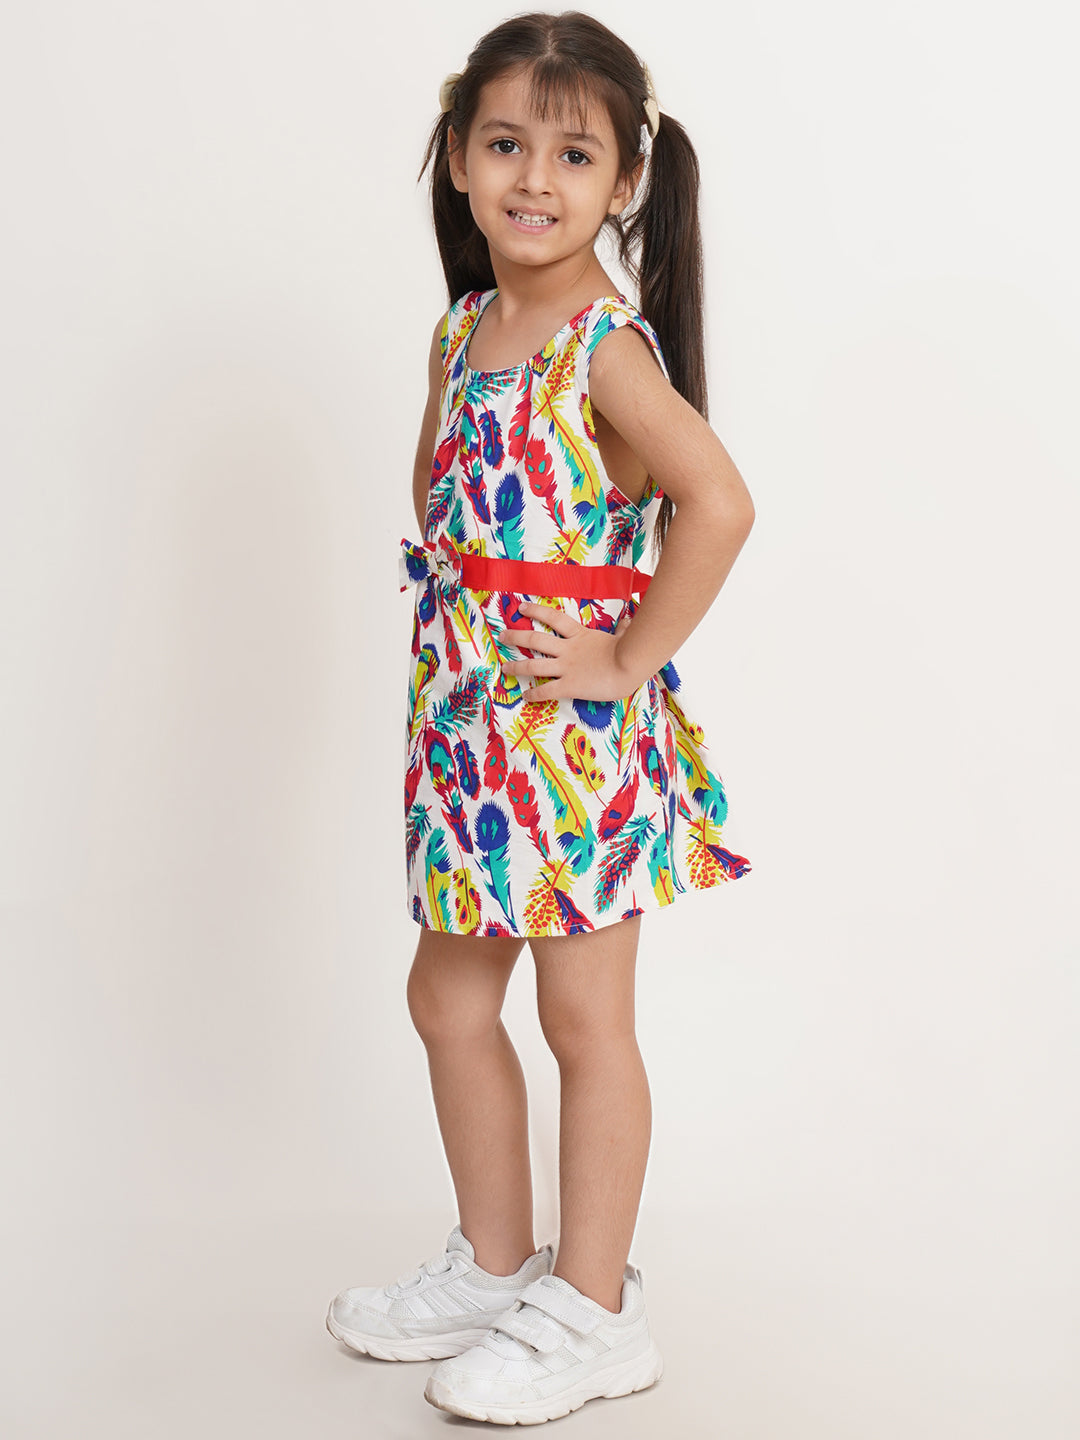 CREATIVE KID'S Girl Blue & Red Feather Print A-Line Cotton Dress